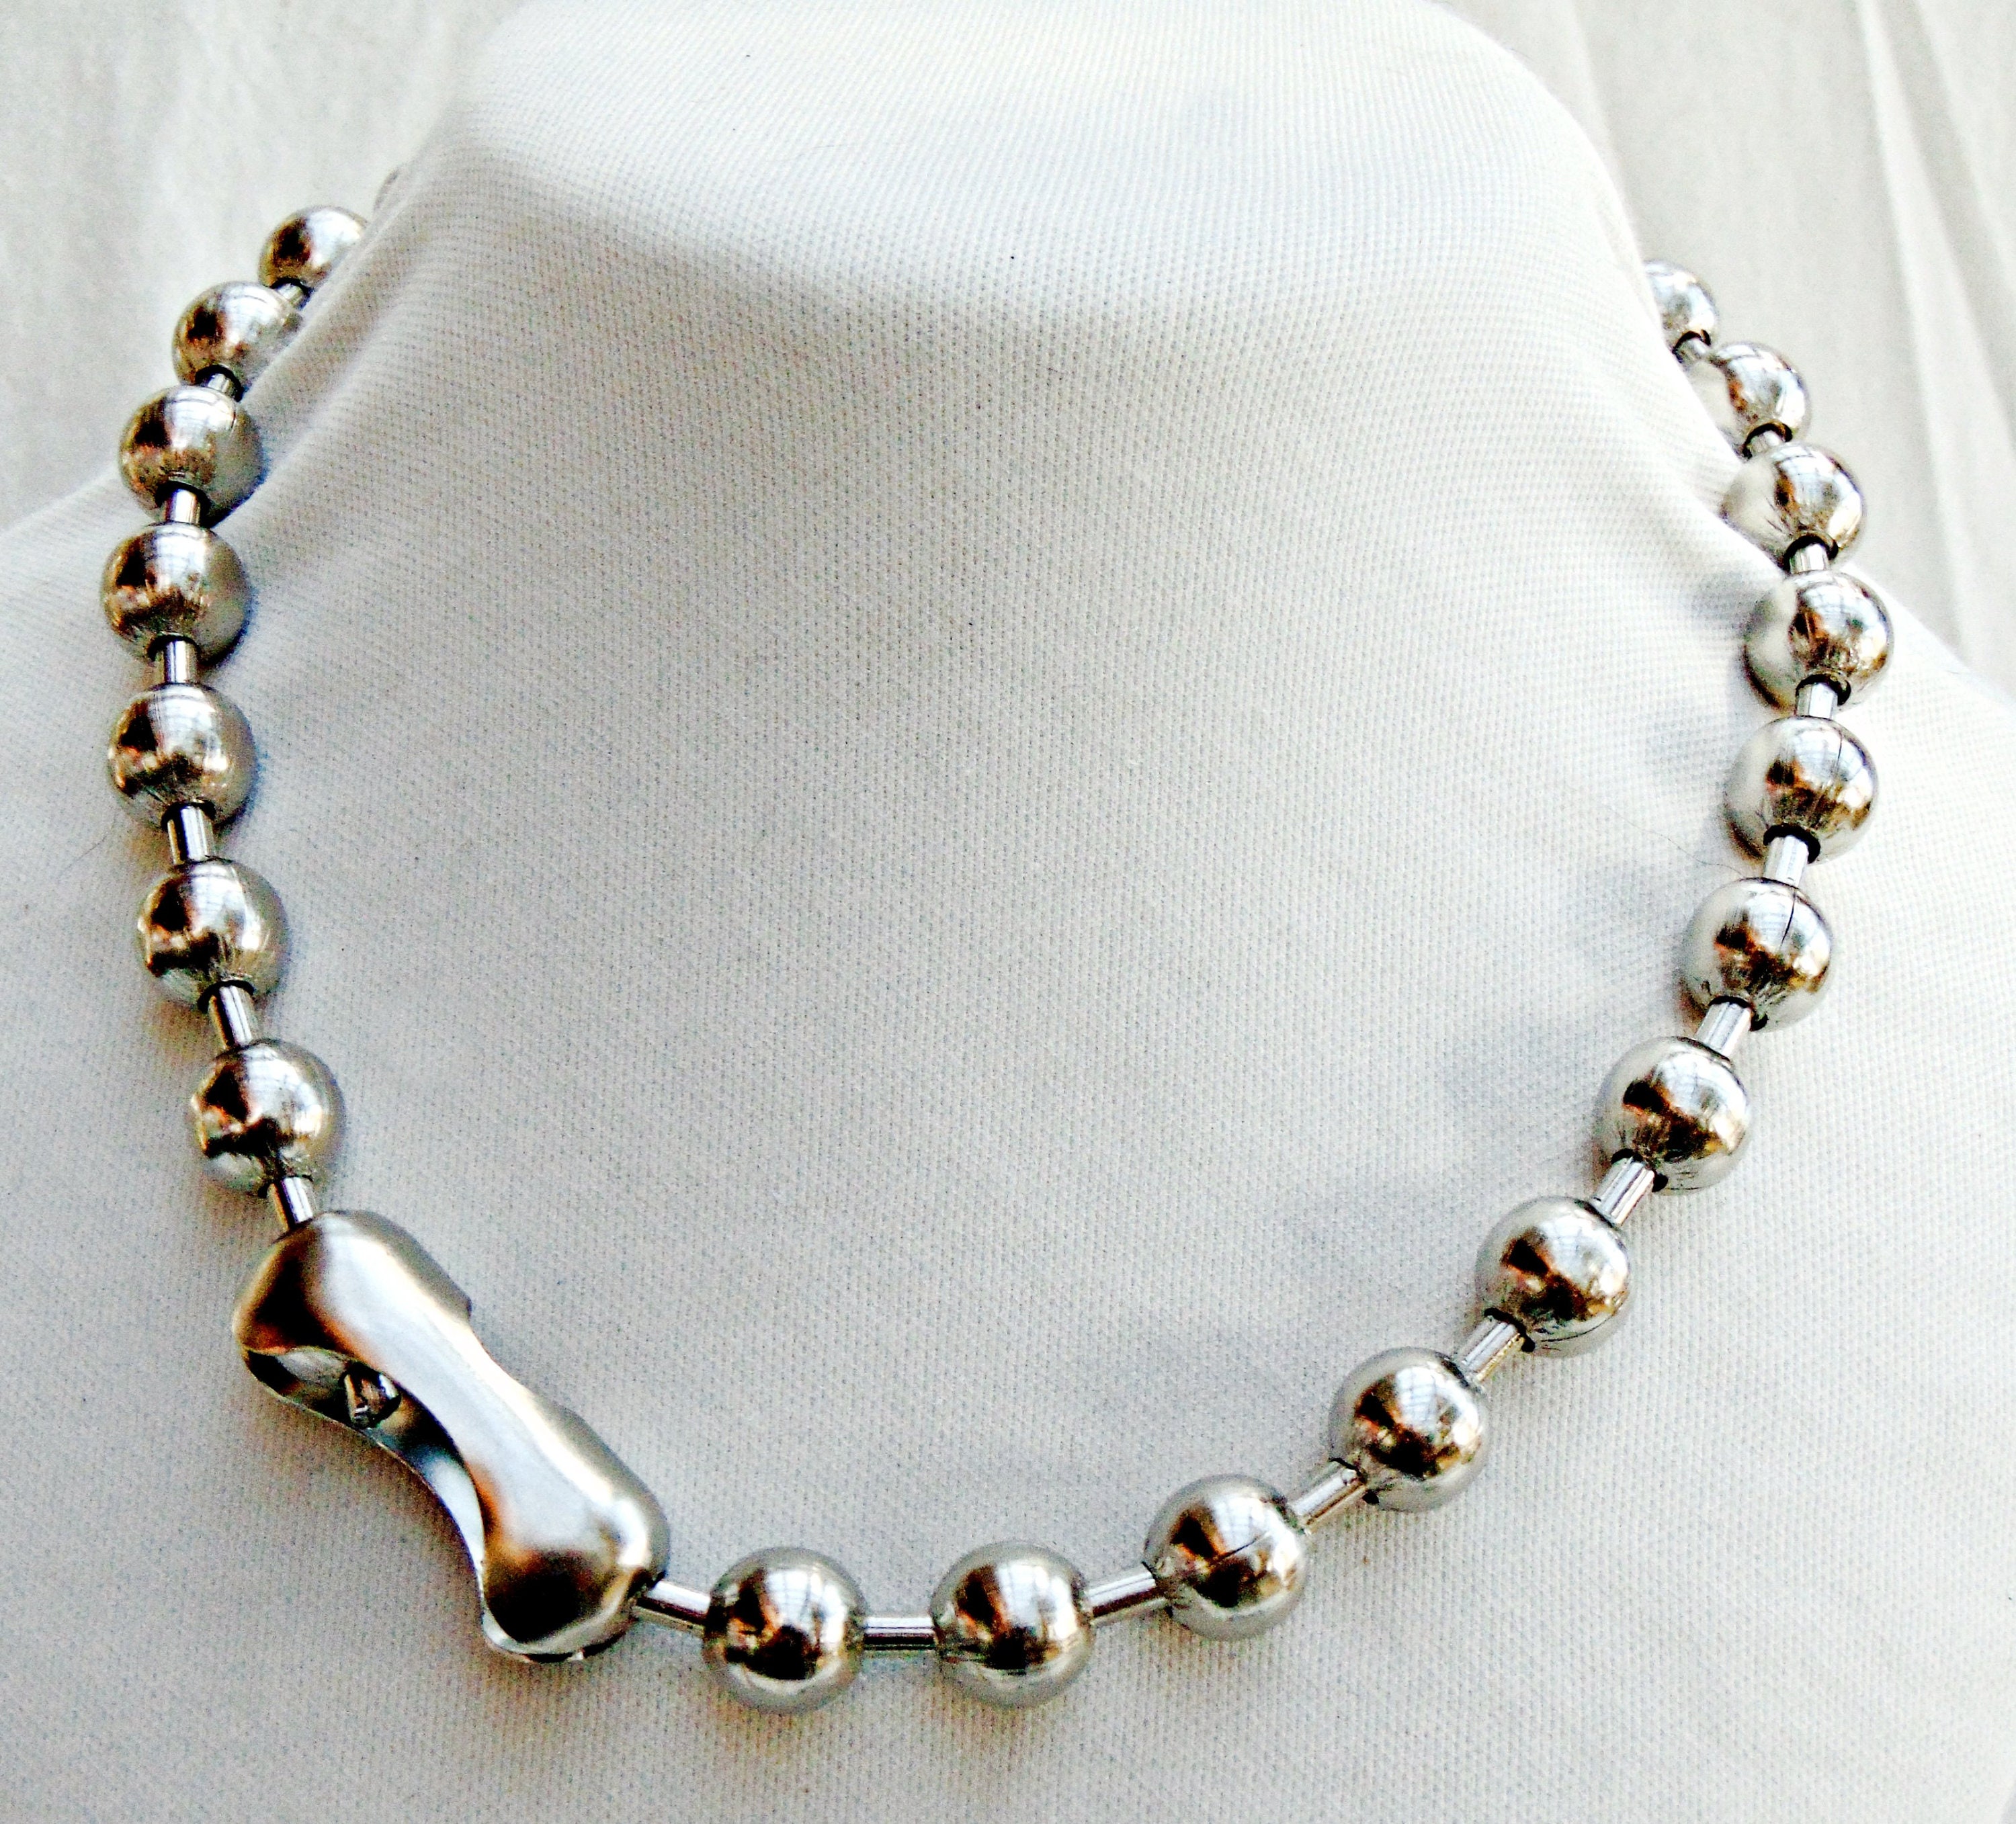 Extra Large Ball Chain Necklace ~ Chunky Steel Bead Choker ~ Statement Necklace 12mm #30 ~ 90's Retro